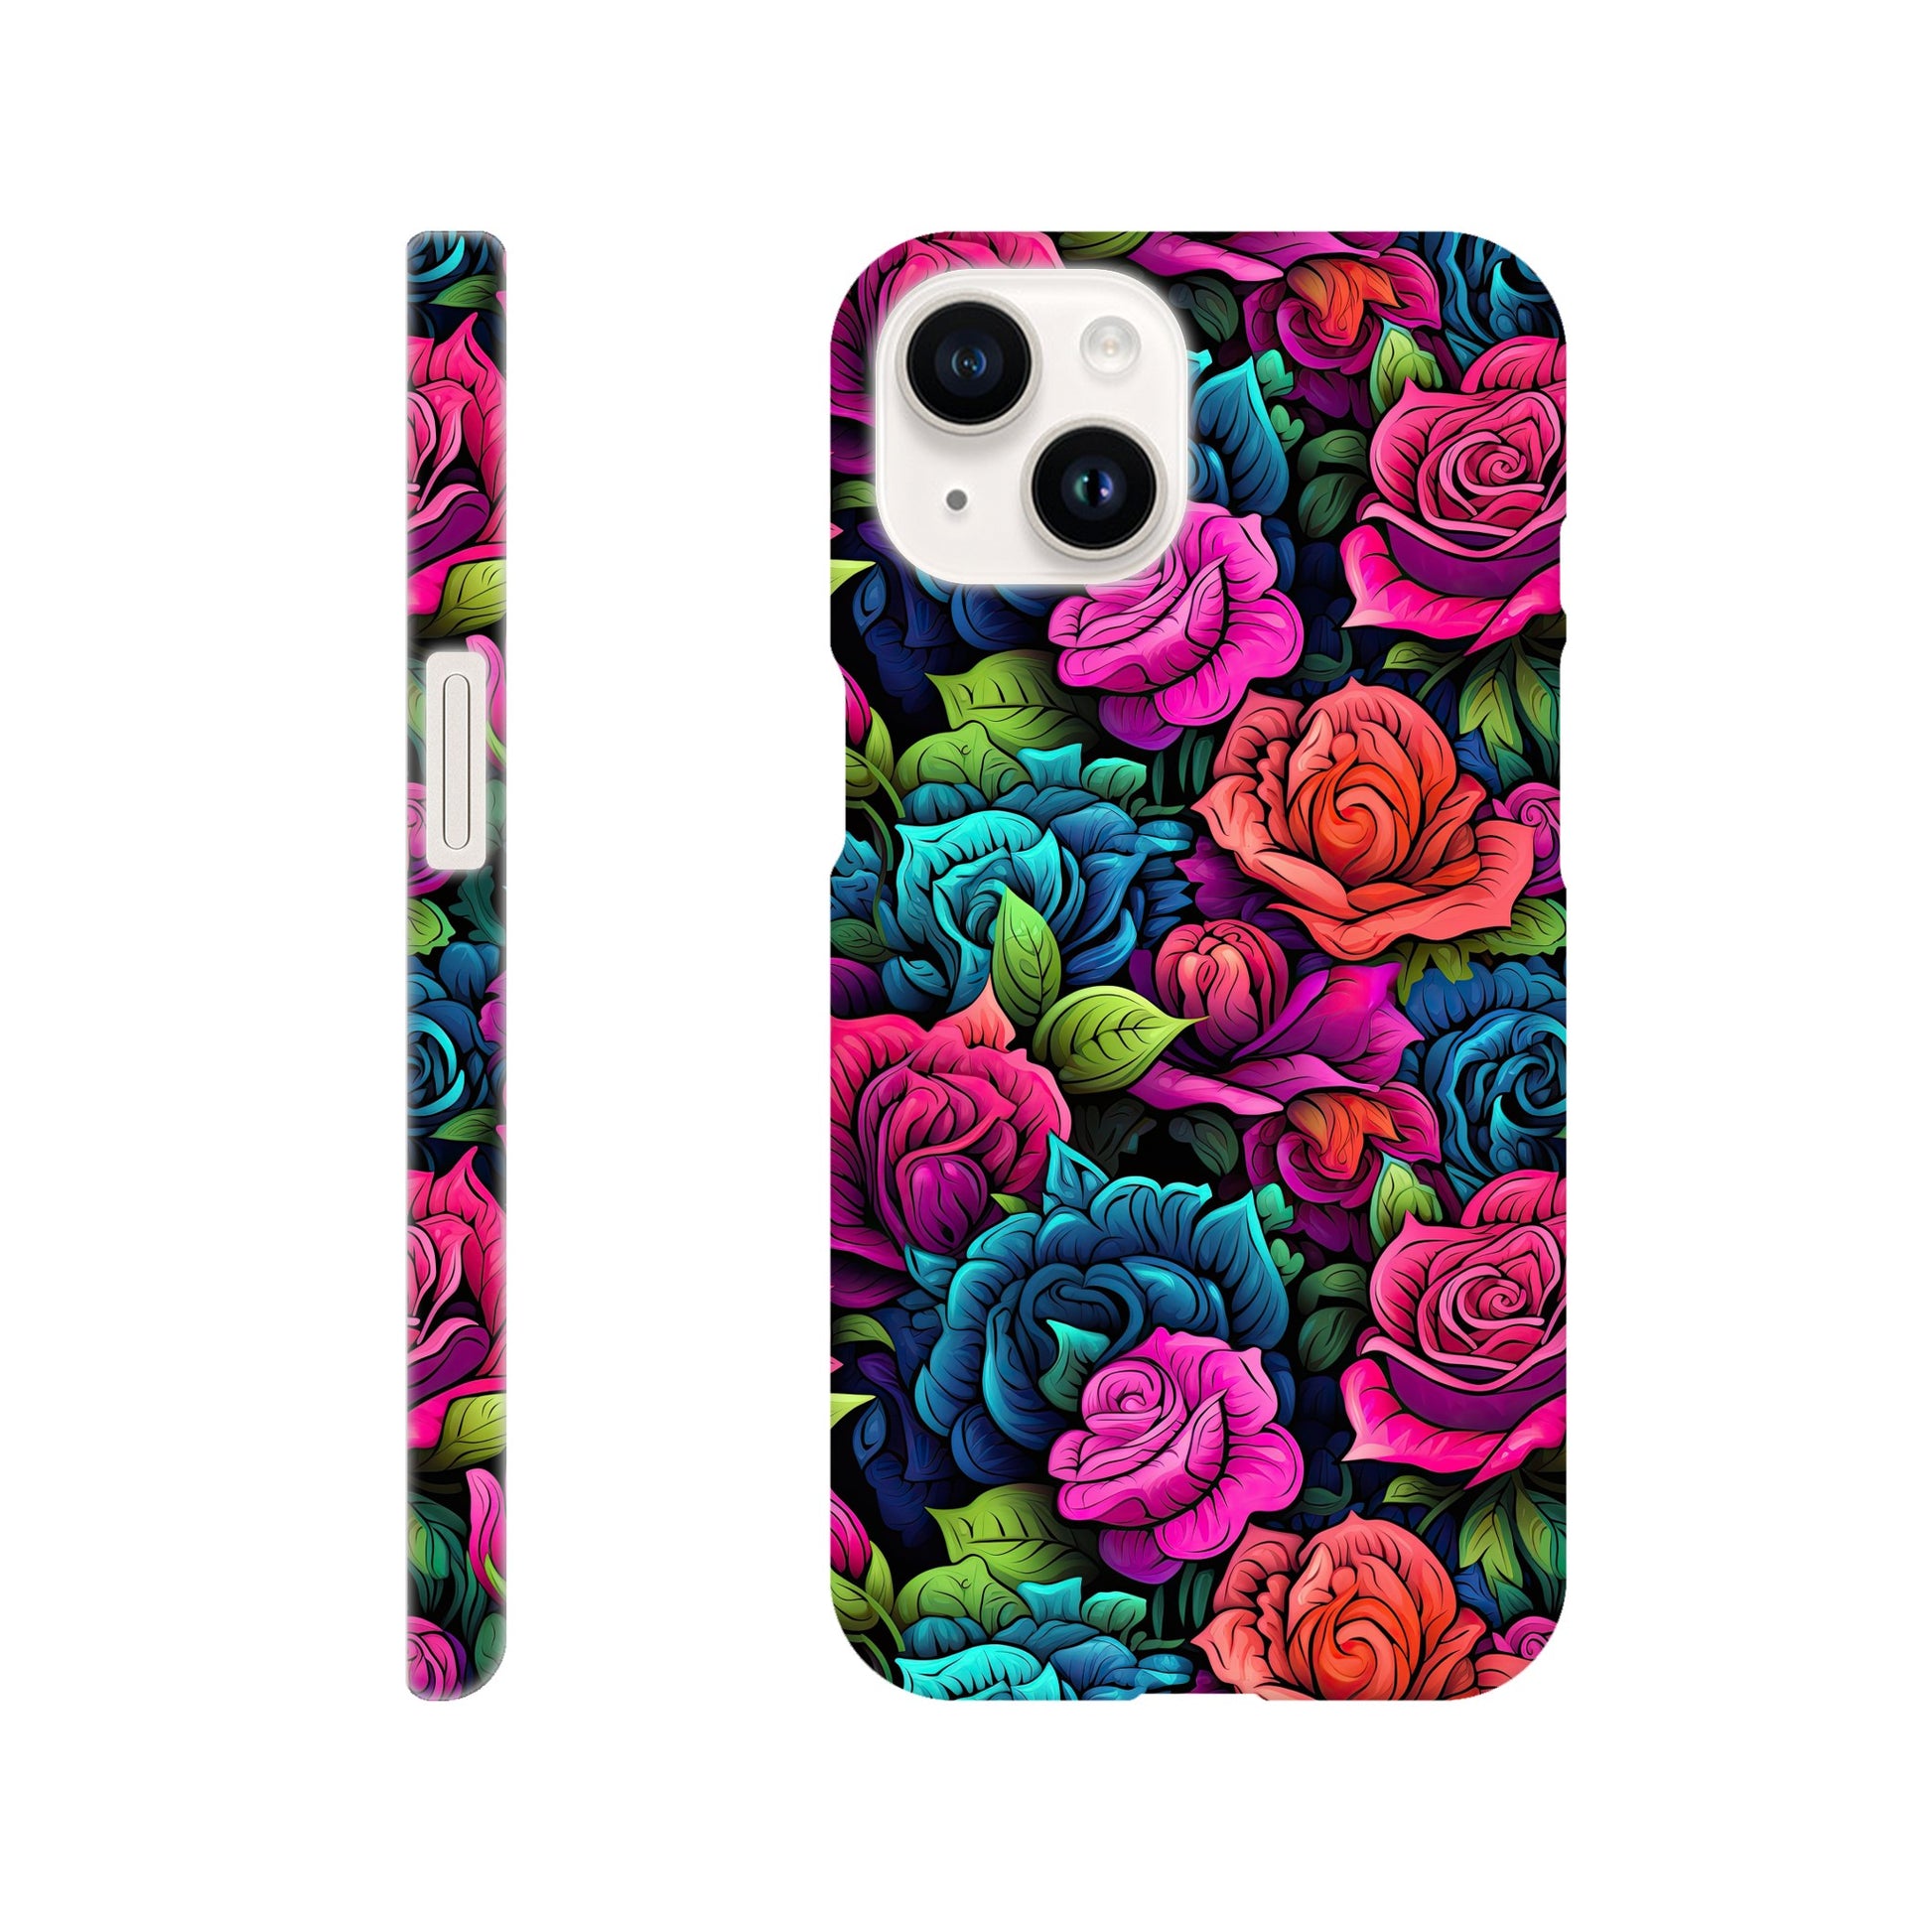 slim phone case with colorful roses all over print